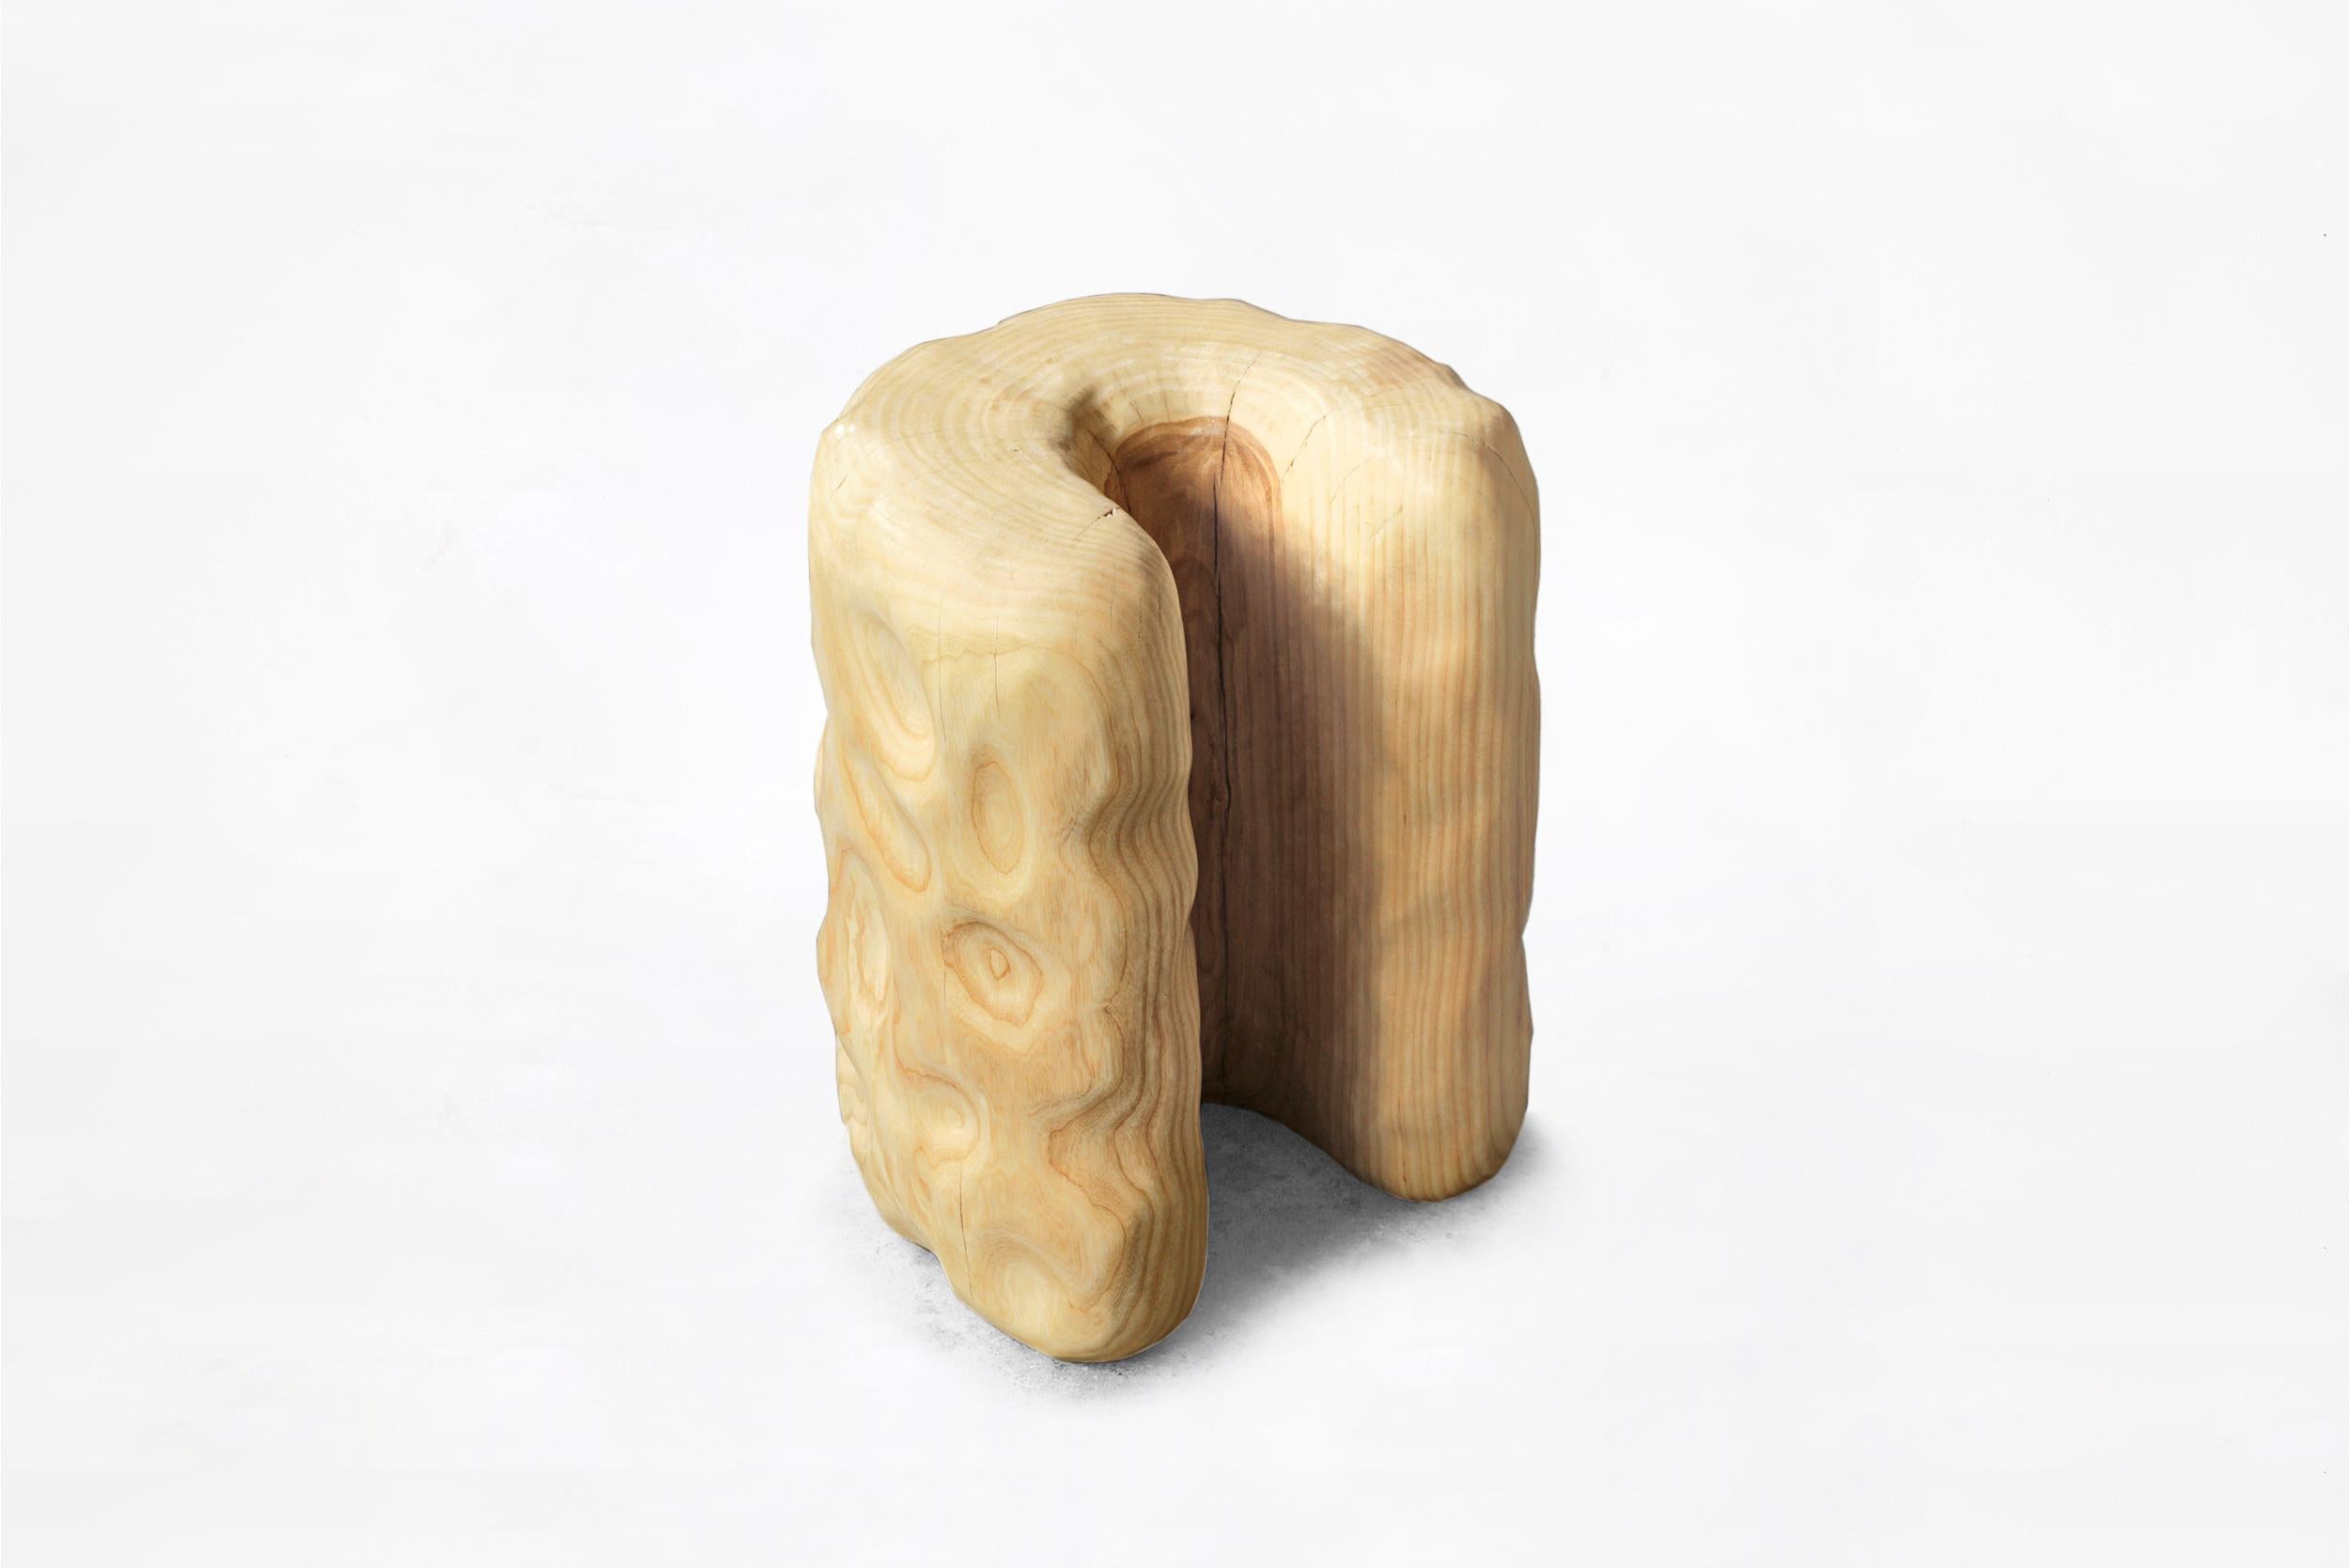 Organic Modern Sigve Knutson U Trunk, Wood, Manufactured by Sigve Knutson Oslo, Norway, 2019 For Sale